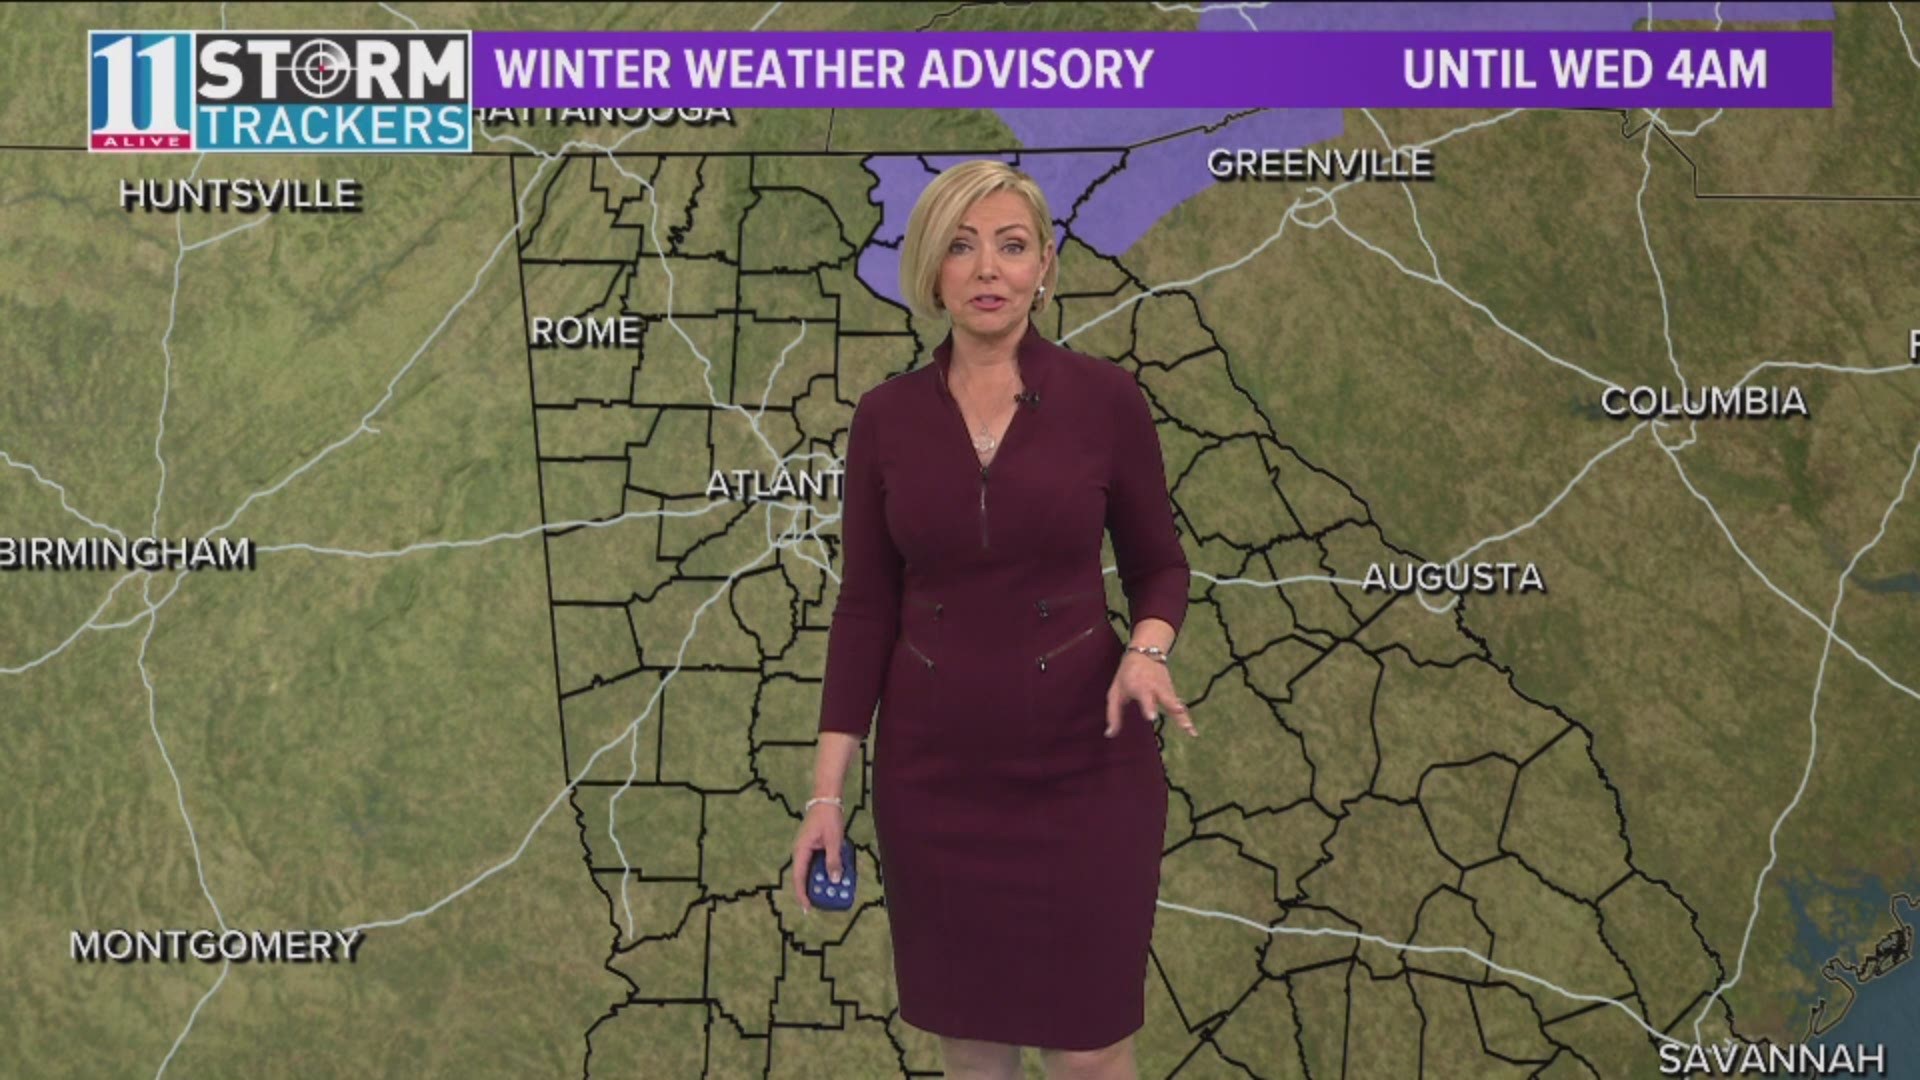 11Alive StormTracker meteorologist Samantha Mohr has the weather forecast for Tuesday, Jan. 22, 2019.